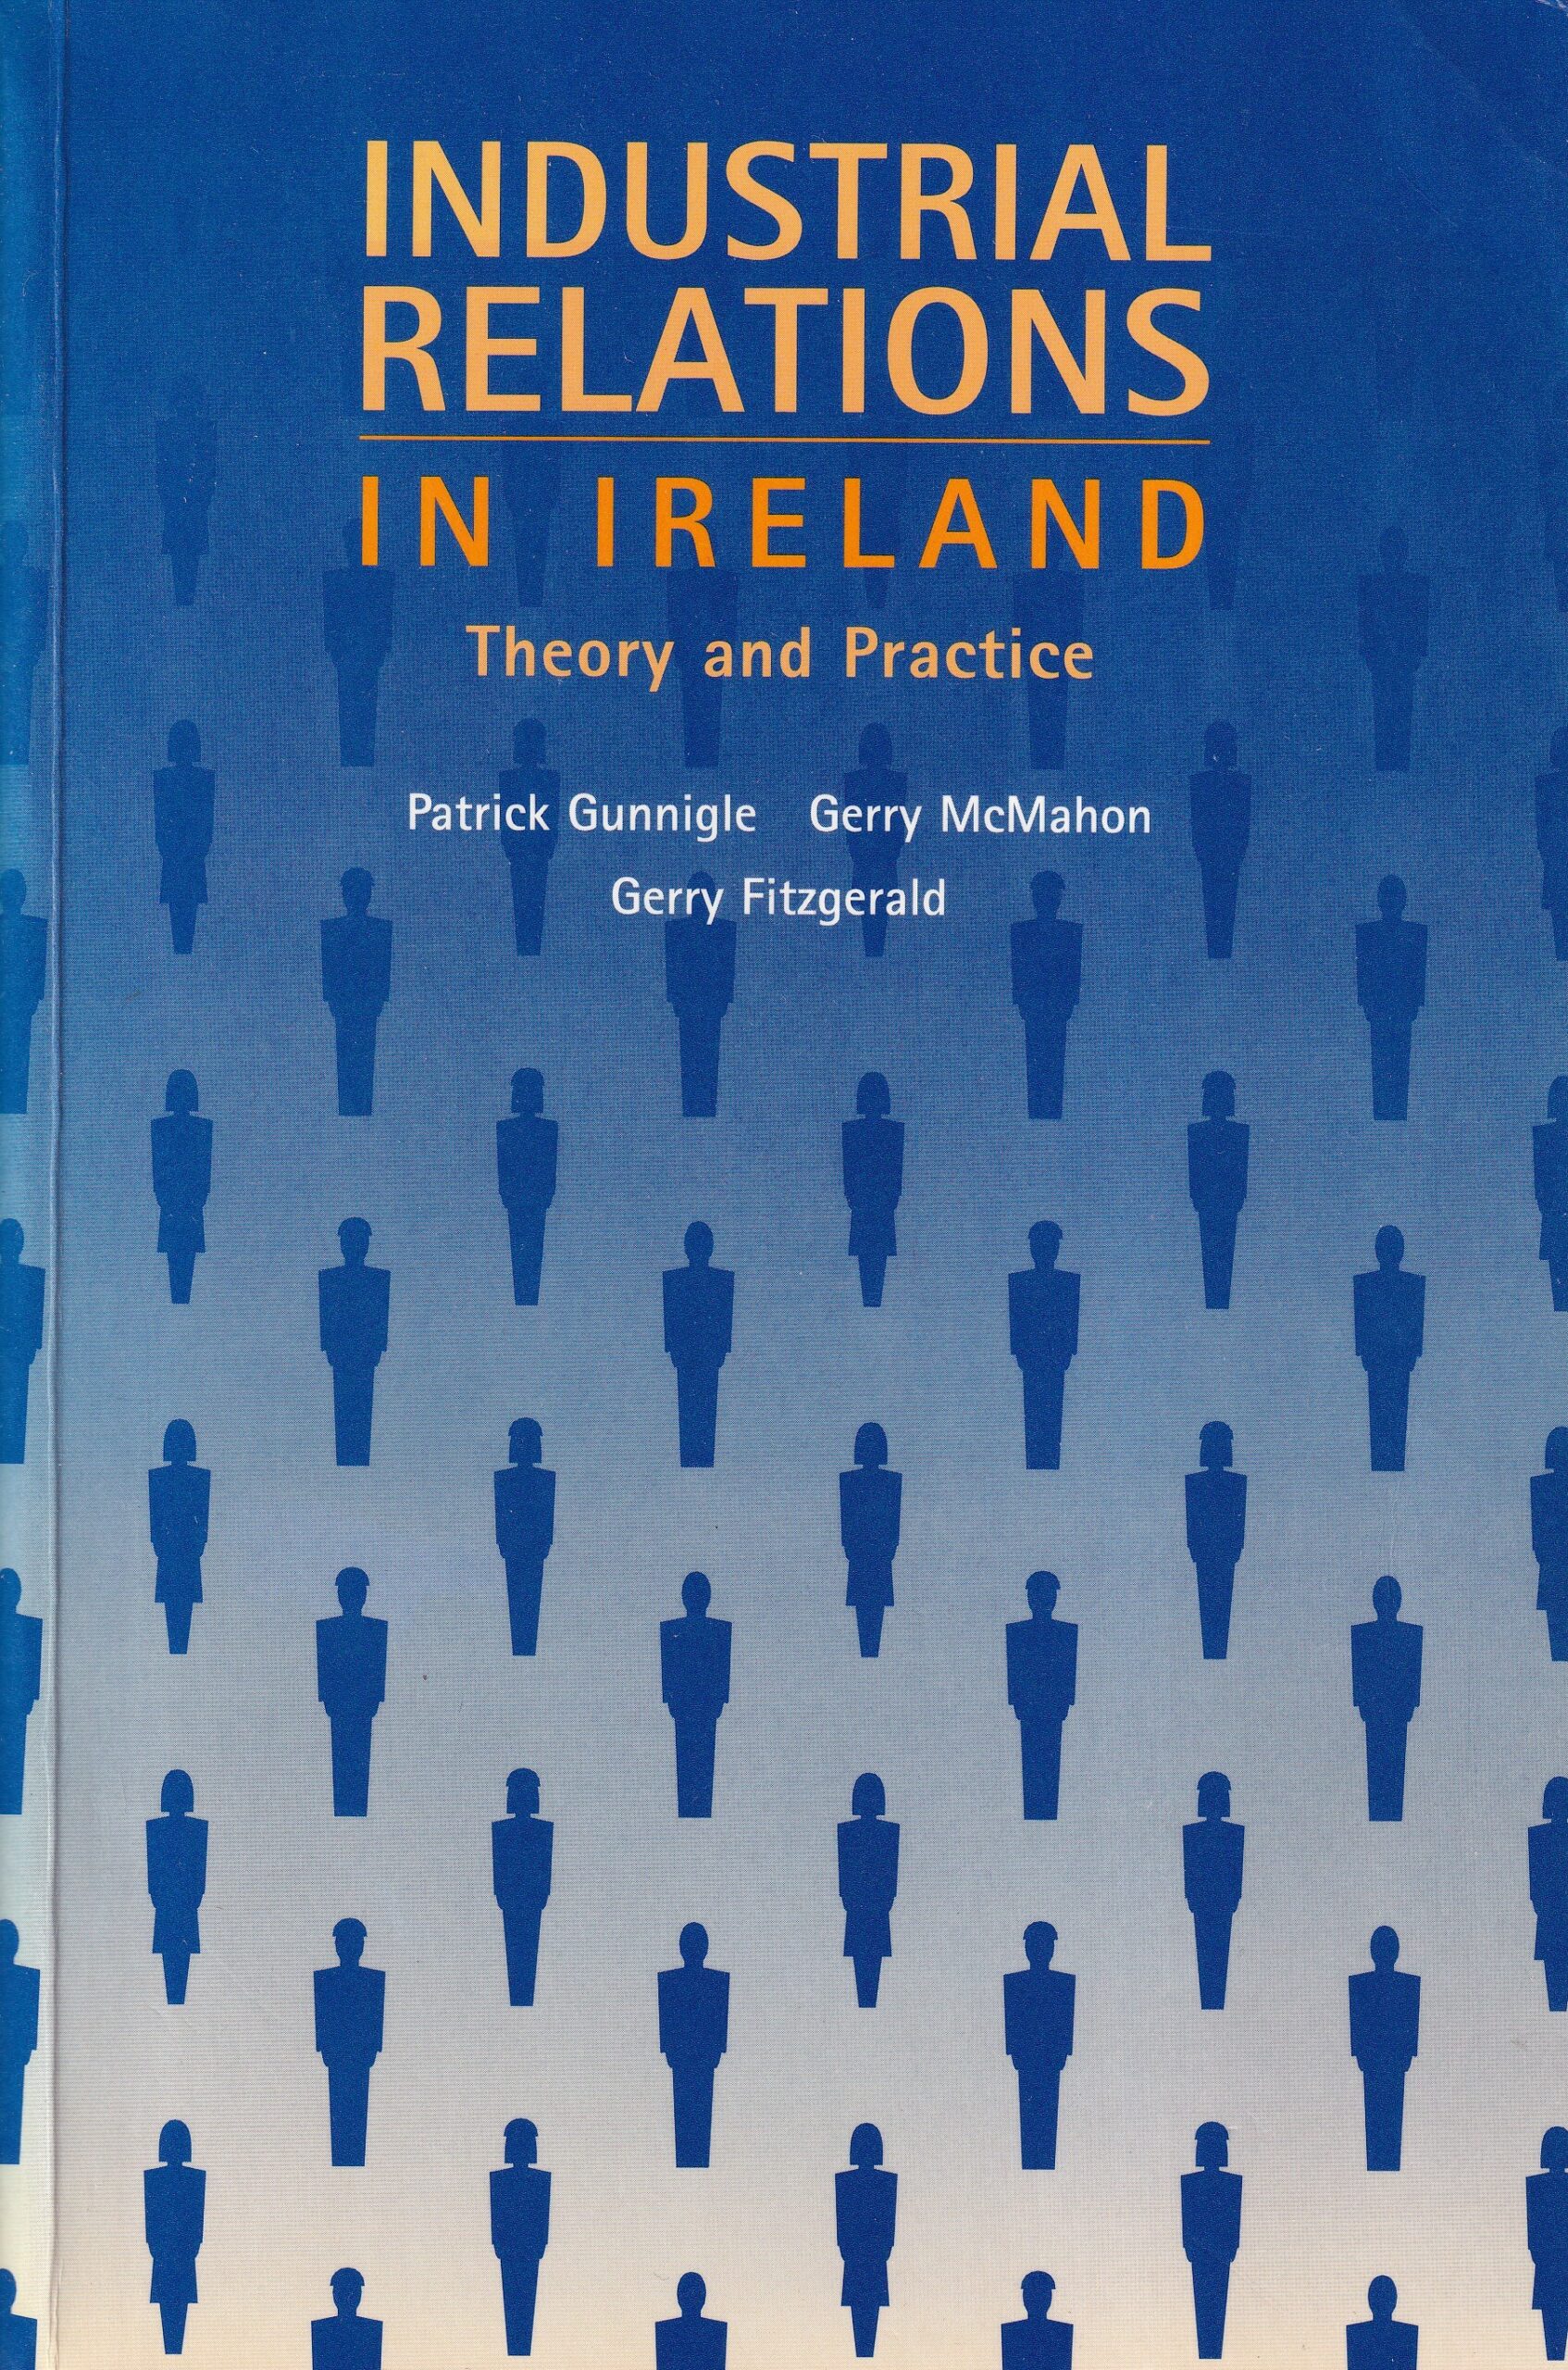 Industrial Relations in Ireland: Theory and Practise | Gerry Fitzgerald, Patrick Gunnigle and Gerry McMahon (eds.) | Charlie Byrne's